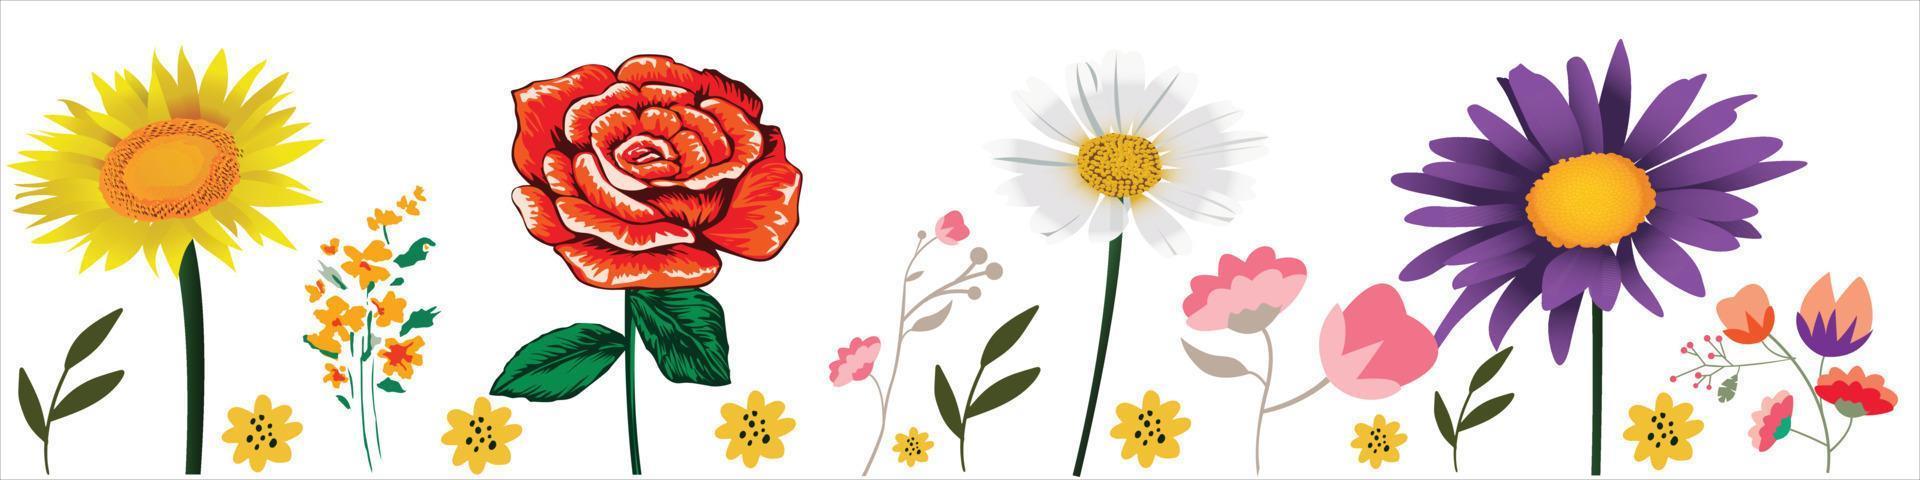 Horizontal white banner or floral backdrop decorated with gorgeous multicolored blooming flowers, roses, Sunflower. vector